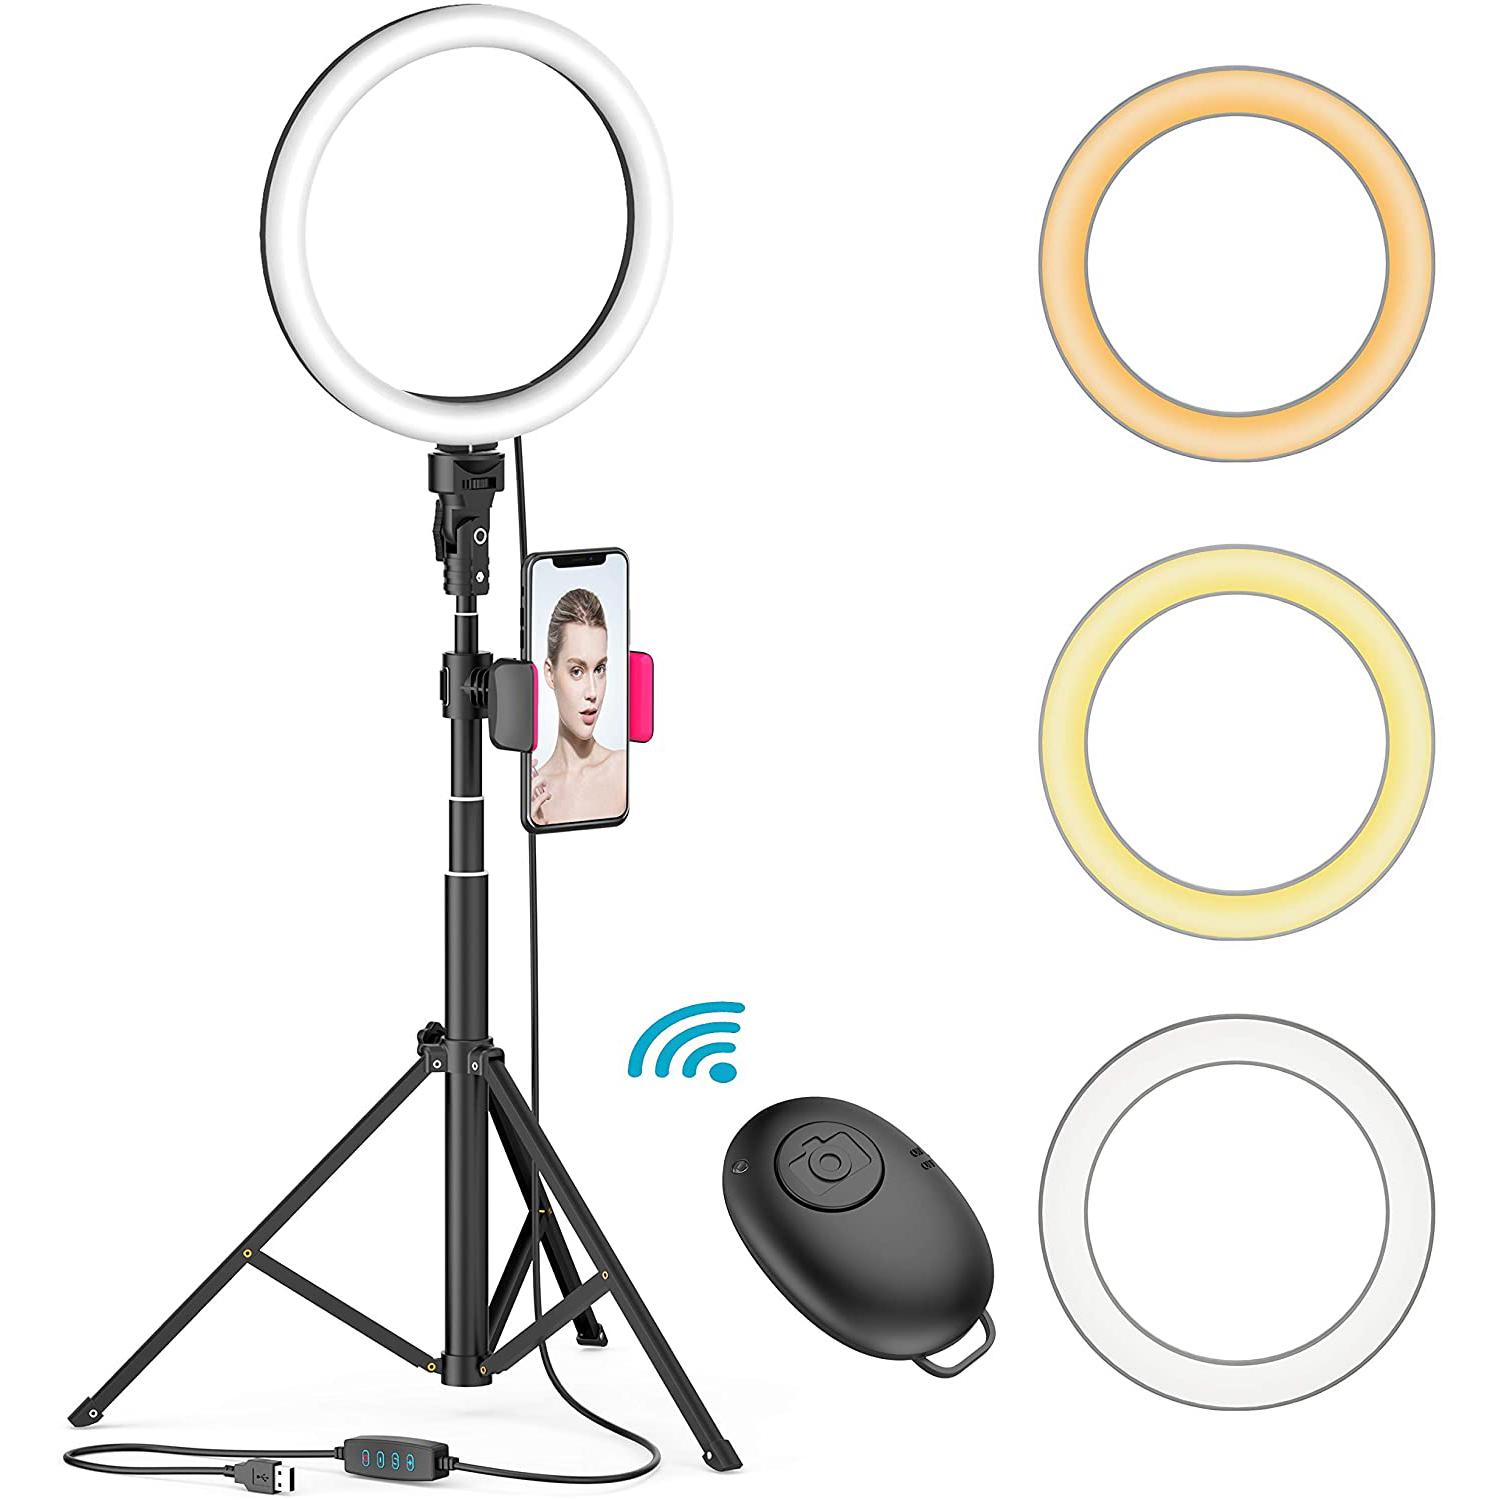 Aptoyu 8in LED Selfie Beauty Ring Light with Tripod Stand for $14.70 Shipped